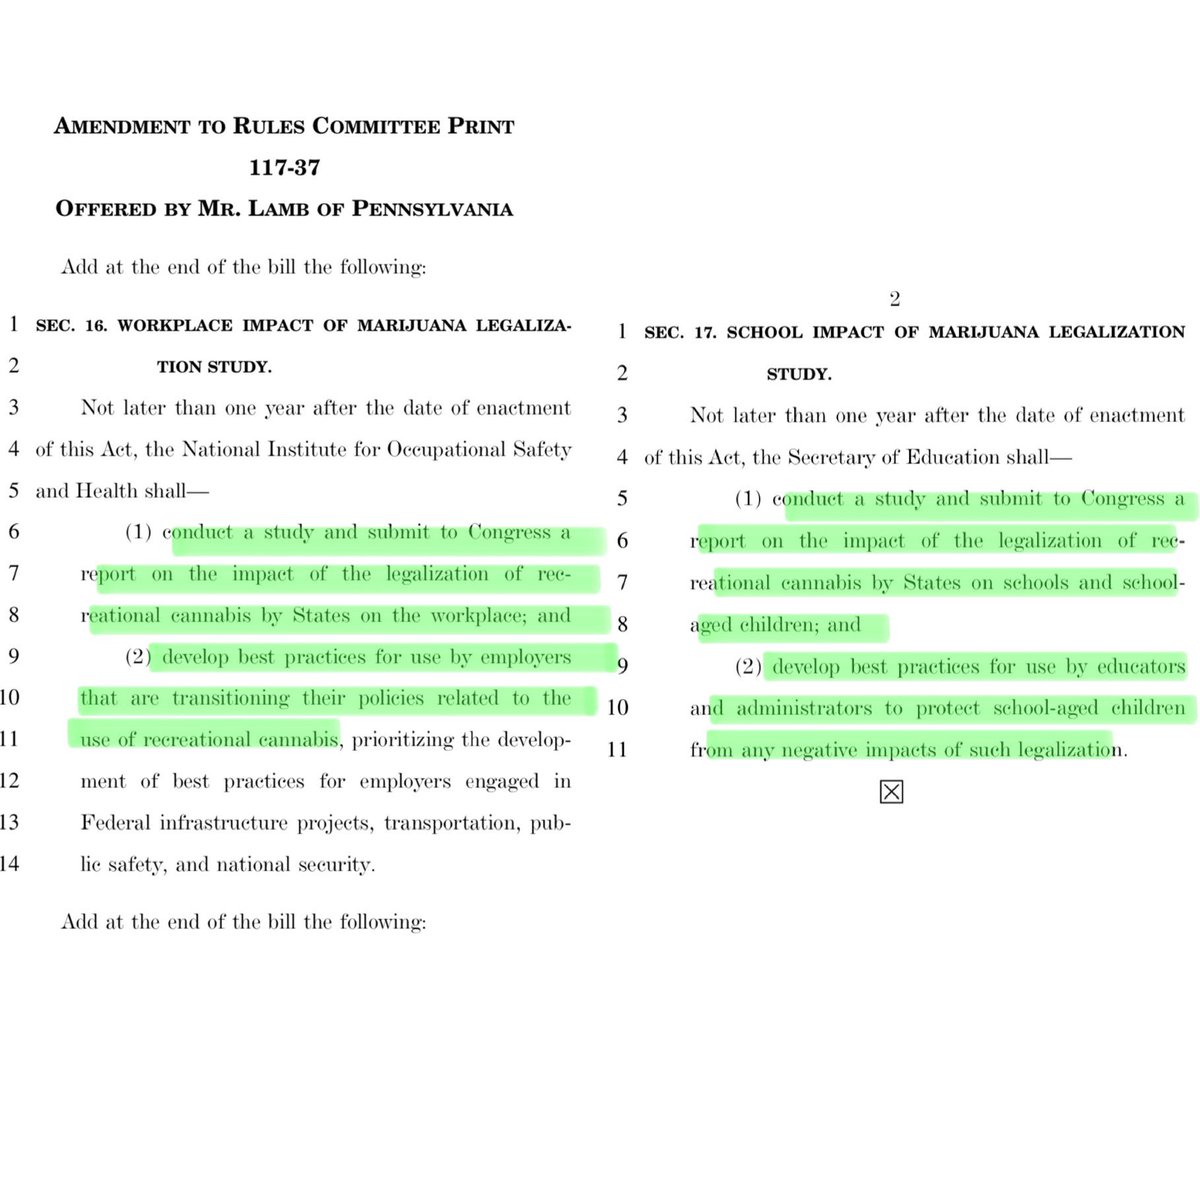 This was the amendment @RepConorLamb got passed today in the #MOREAct. People talking crap about it are showing their true colors. It’s a good amendment and we should have studies on how laws impact the workplace and schools.